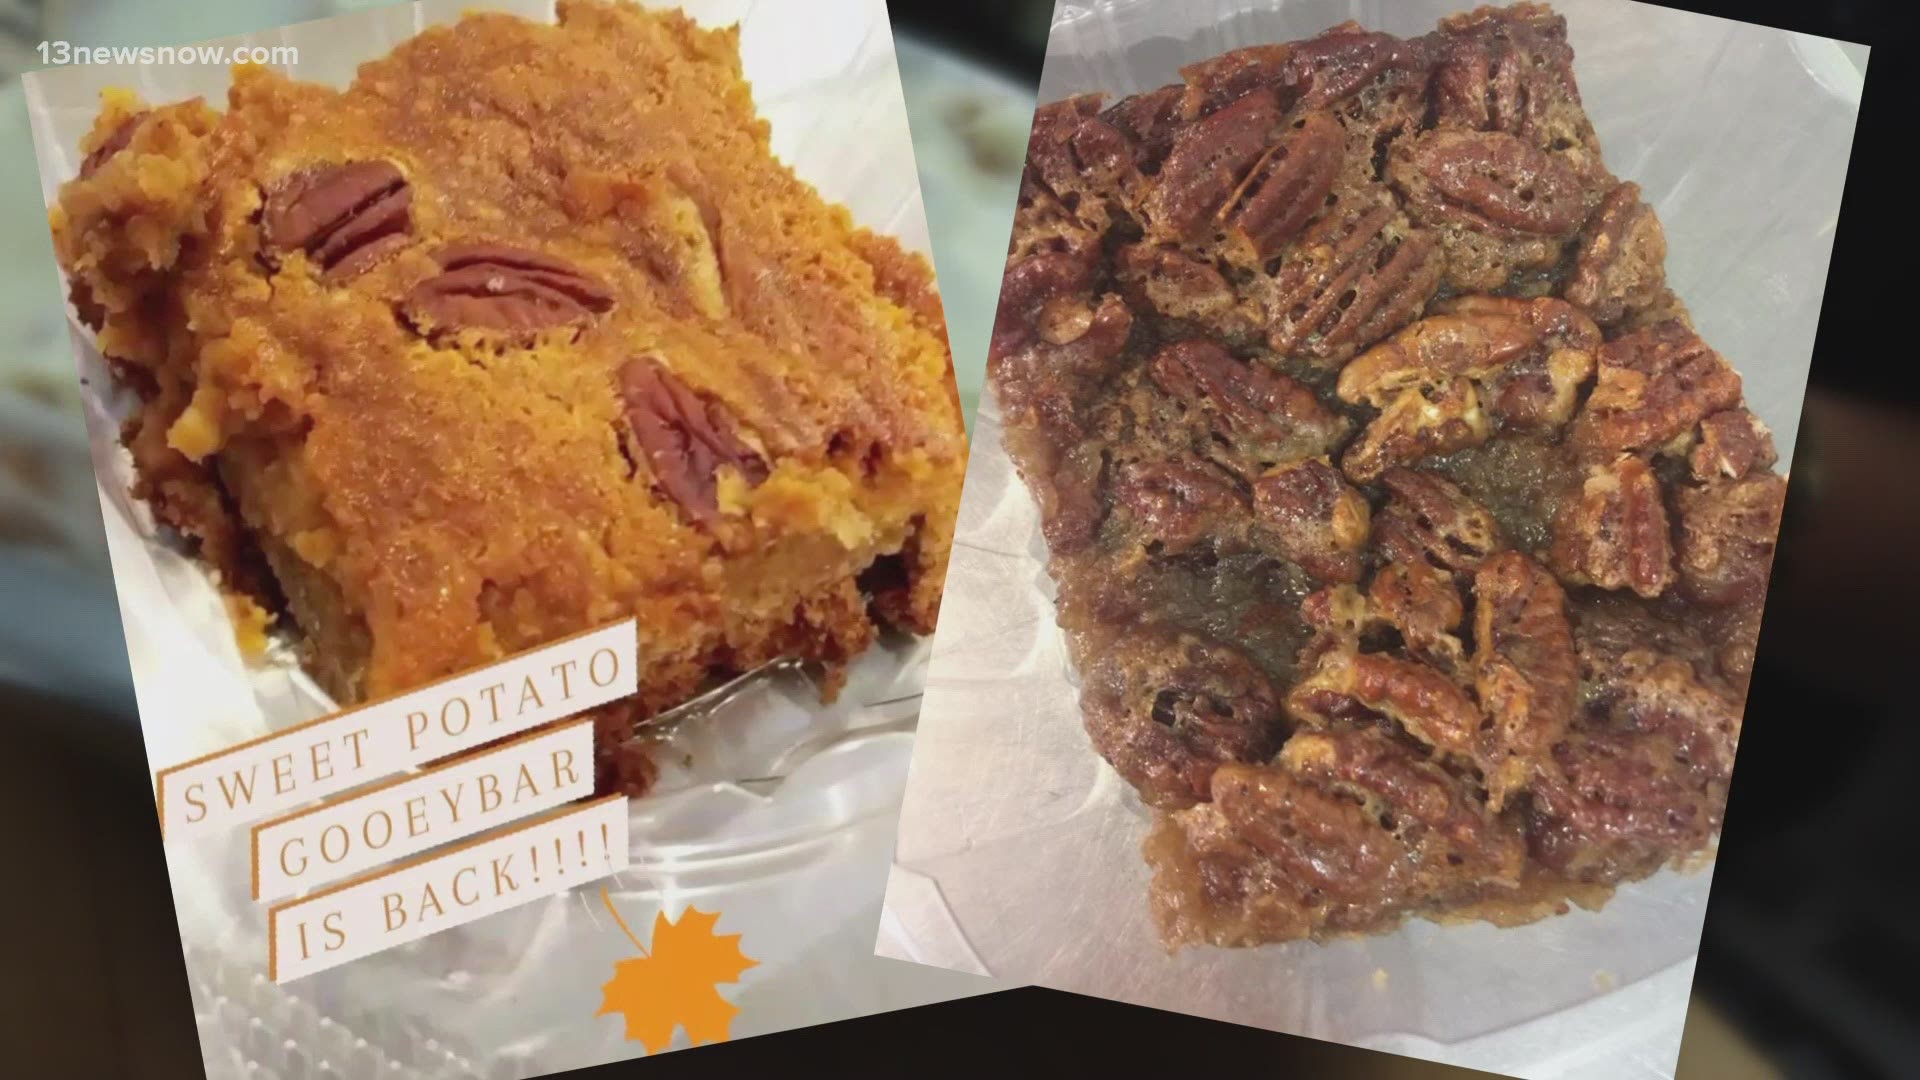 Scratch Bakery in Newport News is known for its amazing carrot cake and gooey bars. The bakery will soon open another location in Phoebus.